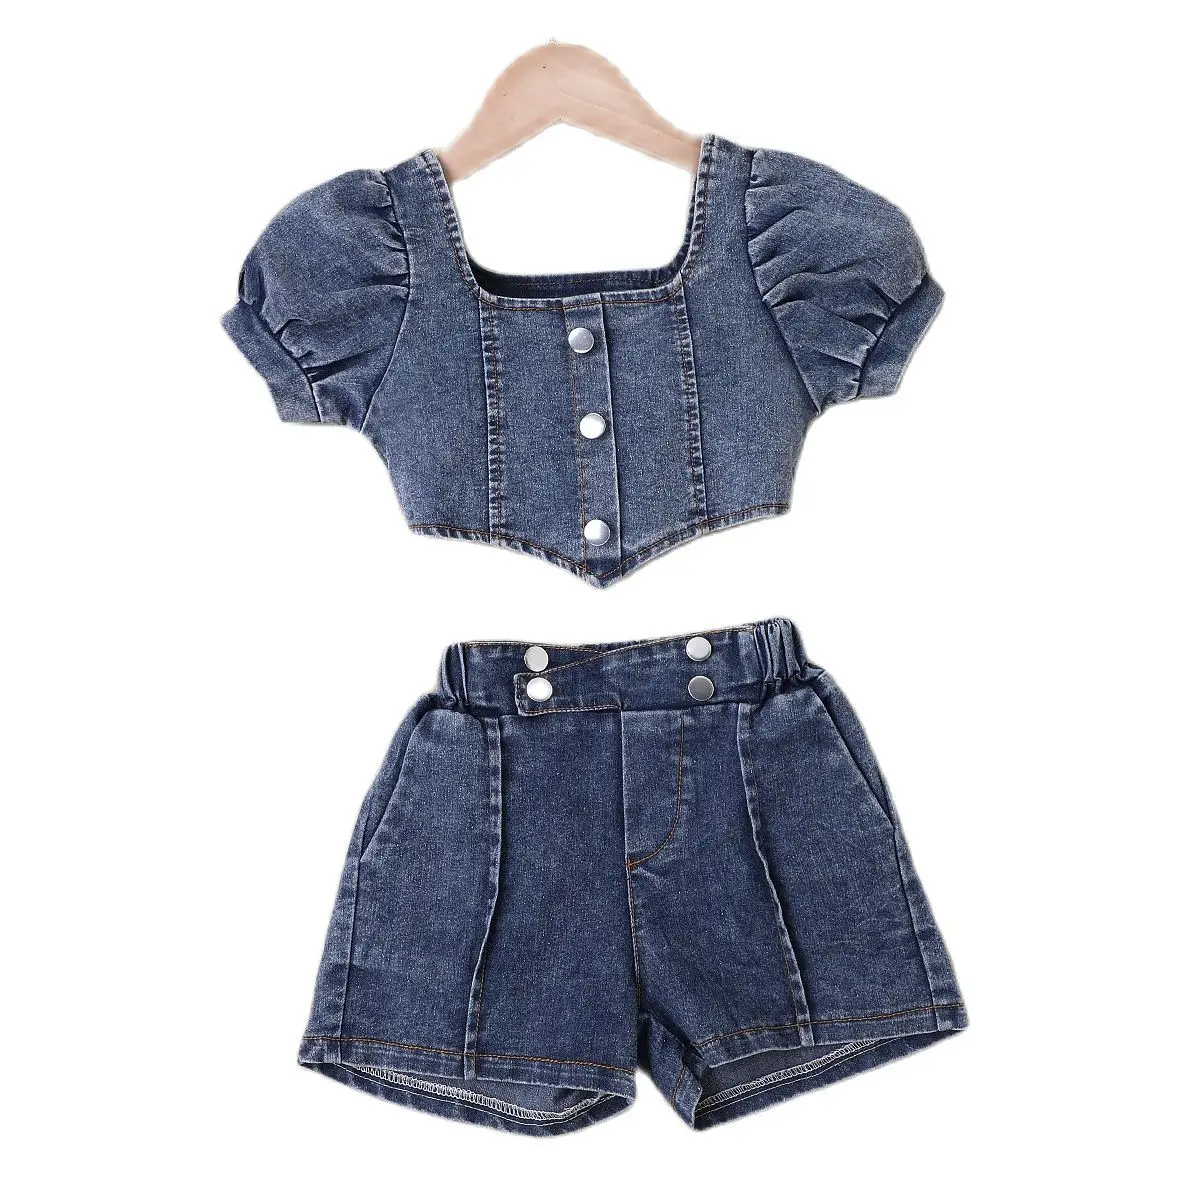 

2-7Y Toddler Kids Girls Denim Clothes Set Baby Summer Outfits Short Puff Sleeve Shirt+Buttons Jeans Shorts 2pcs Kids Tracksuits